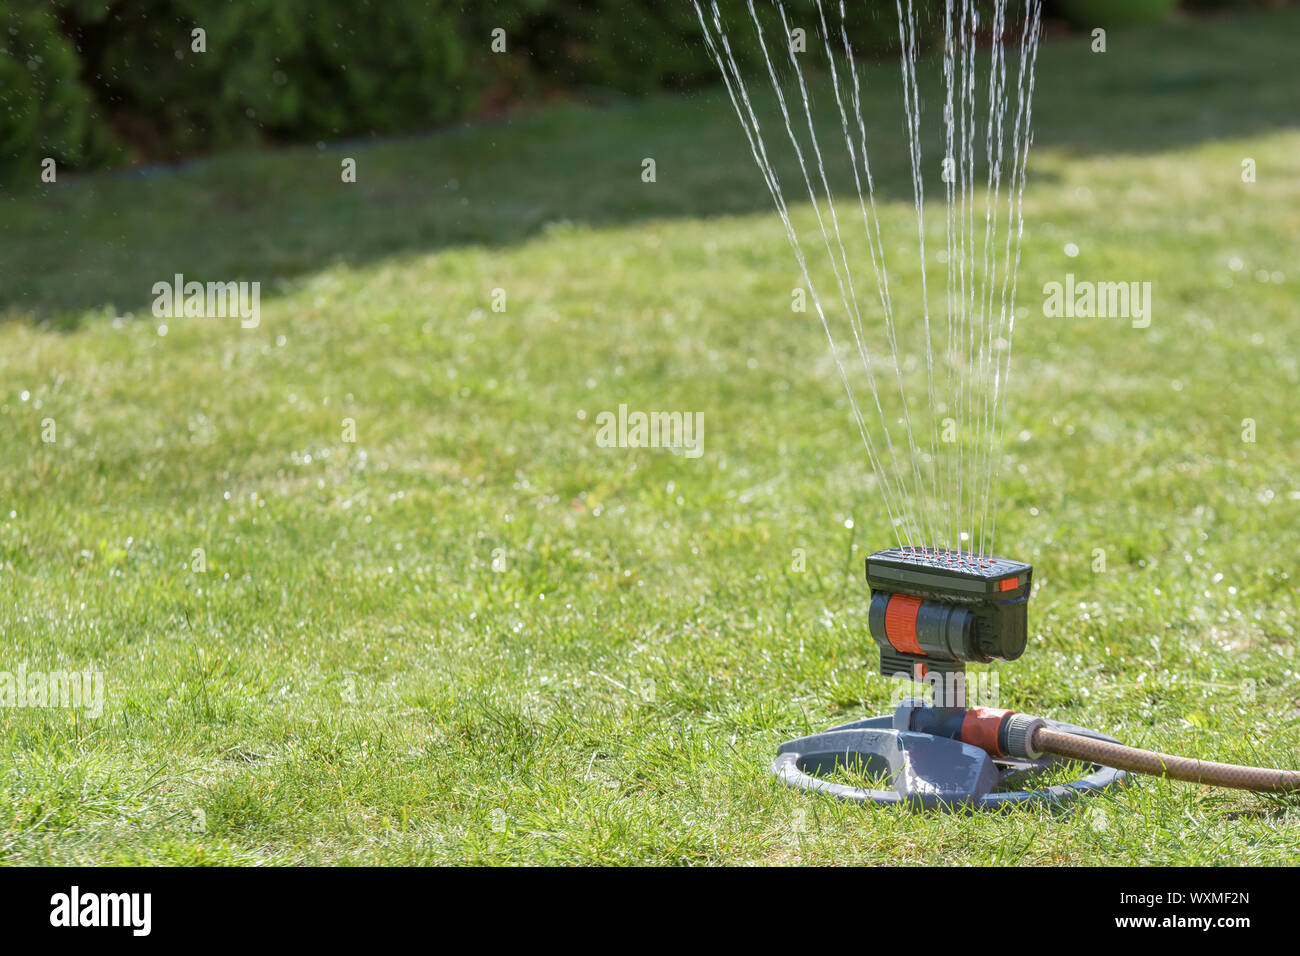 Watering the lawn with an adjustable lawn sprinkler Stock Photo